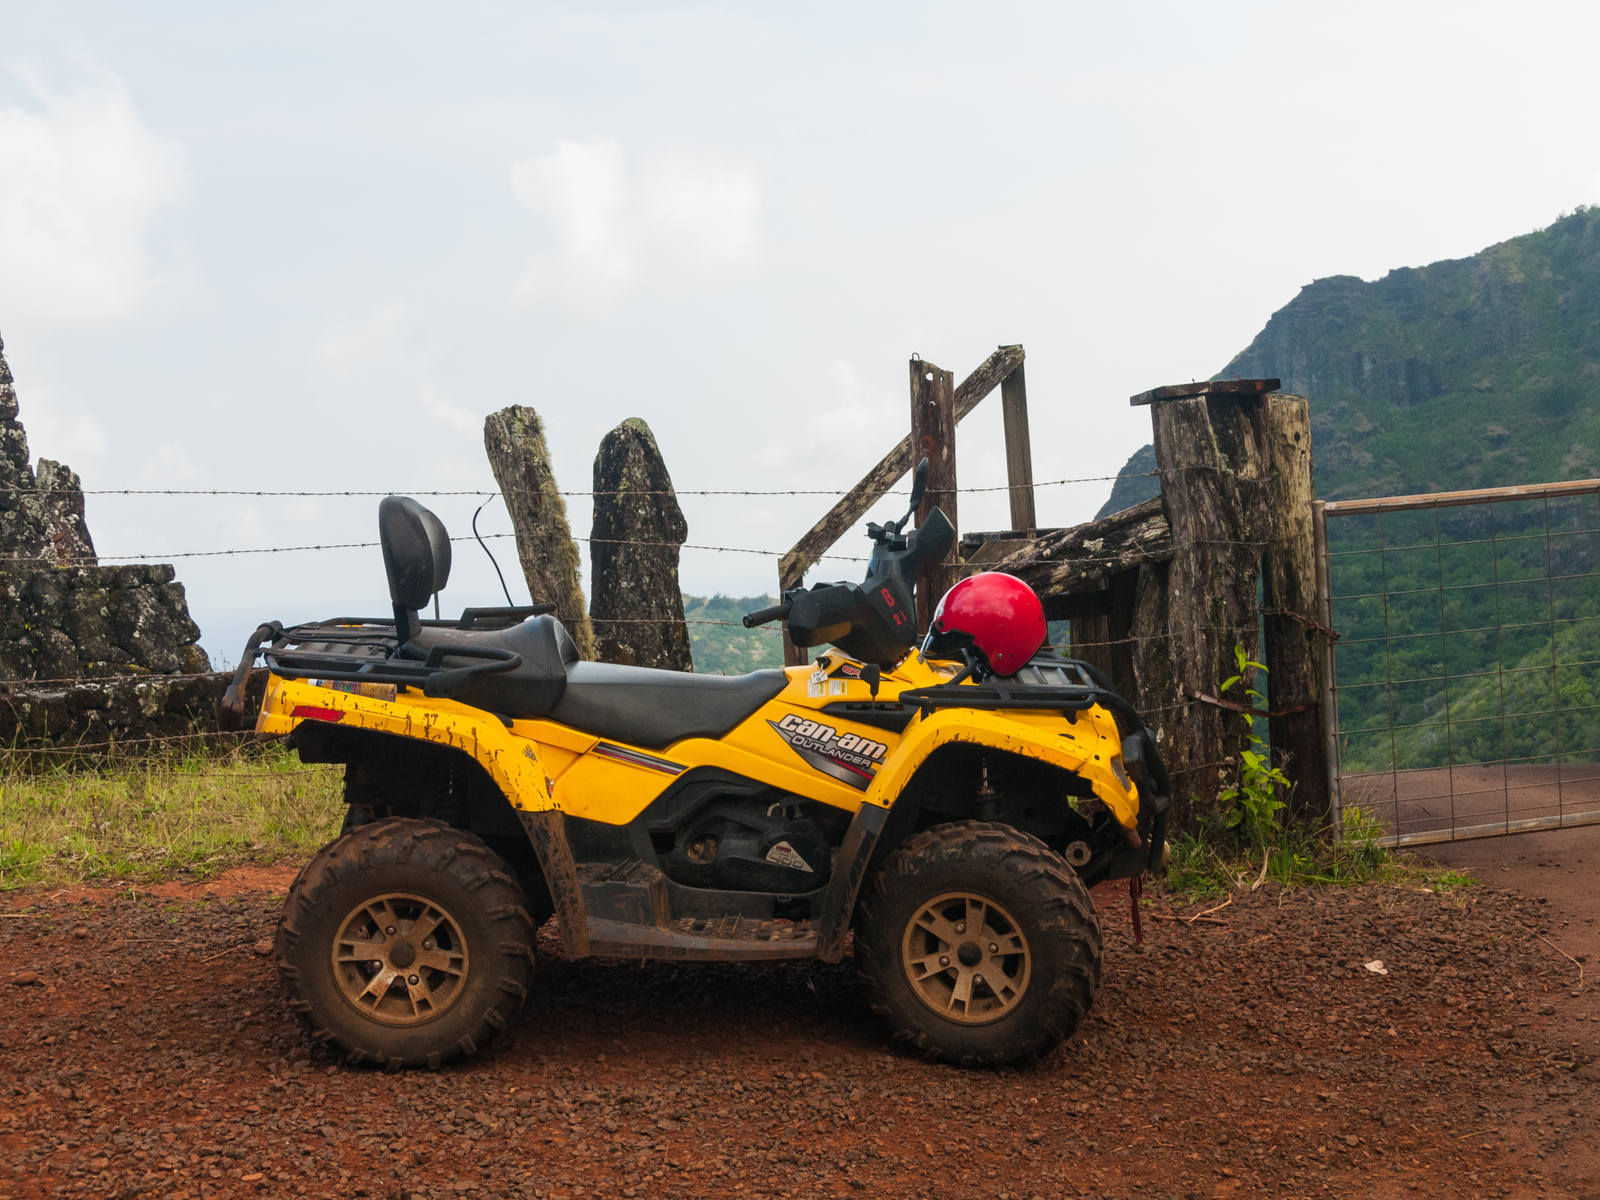 A muddy yellow ATV with a red helmet parked next to a barbed-wire fence, ATV riding is one of the best things to do in Kauai